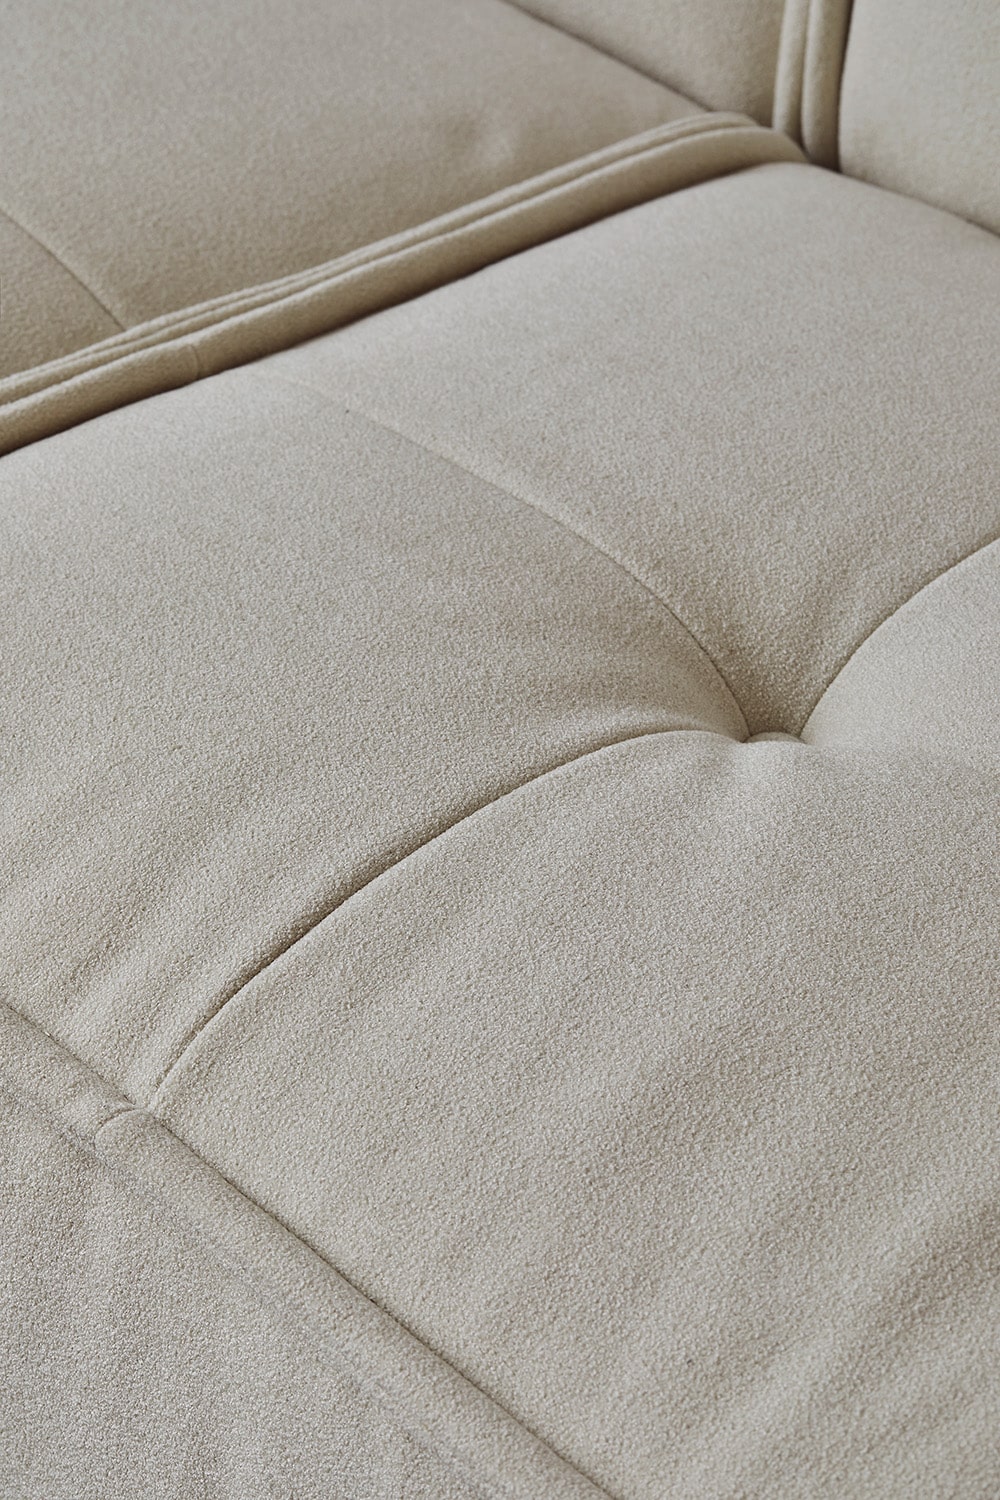 Butter Sofa French Seam Tufted Queens-15 (13)-min